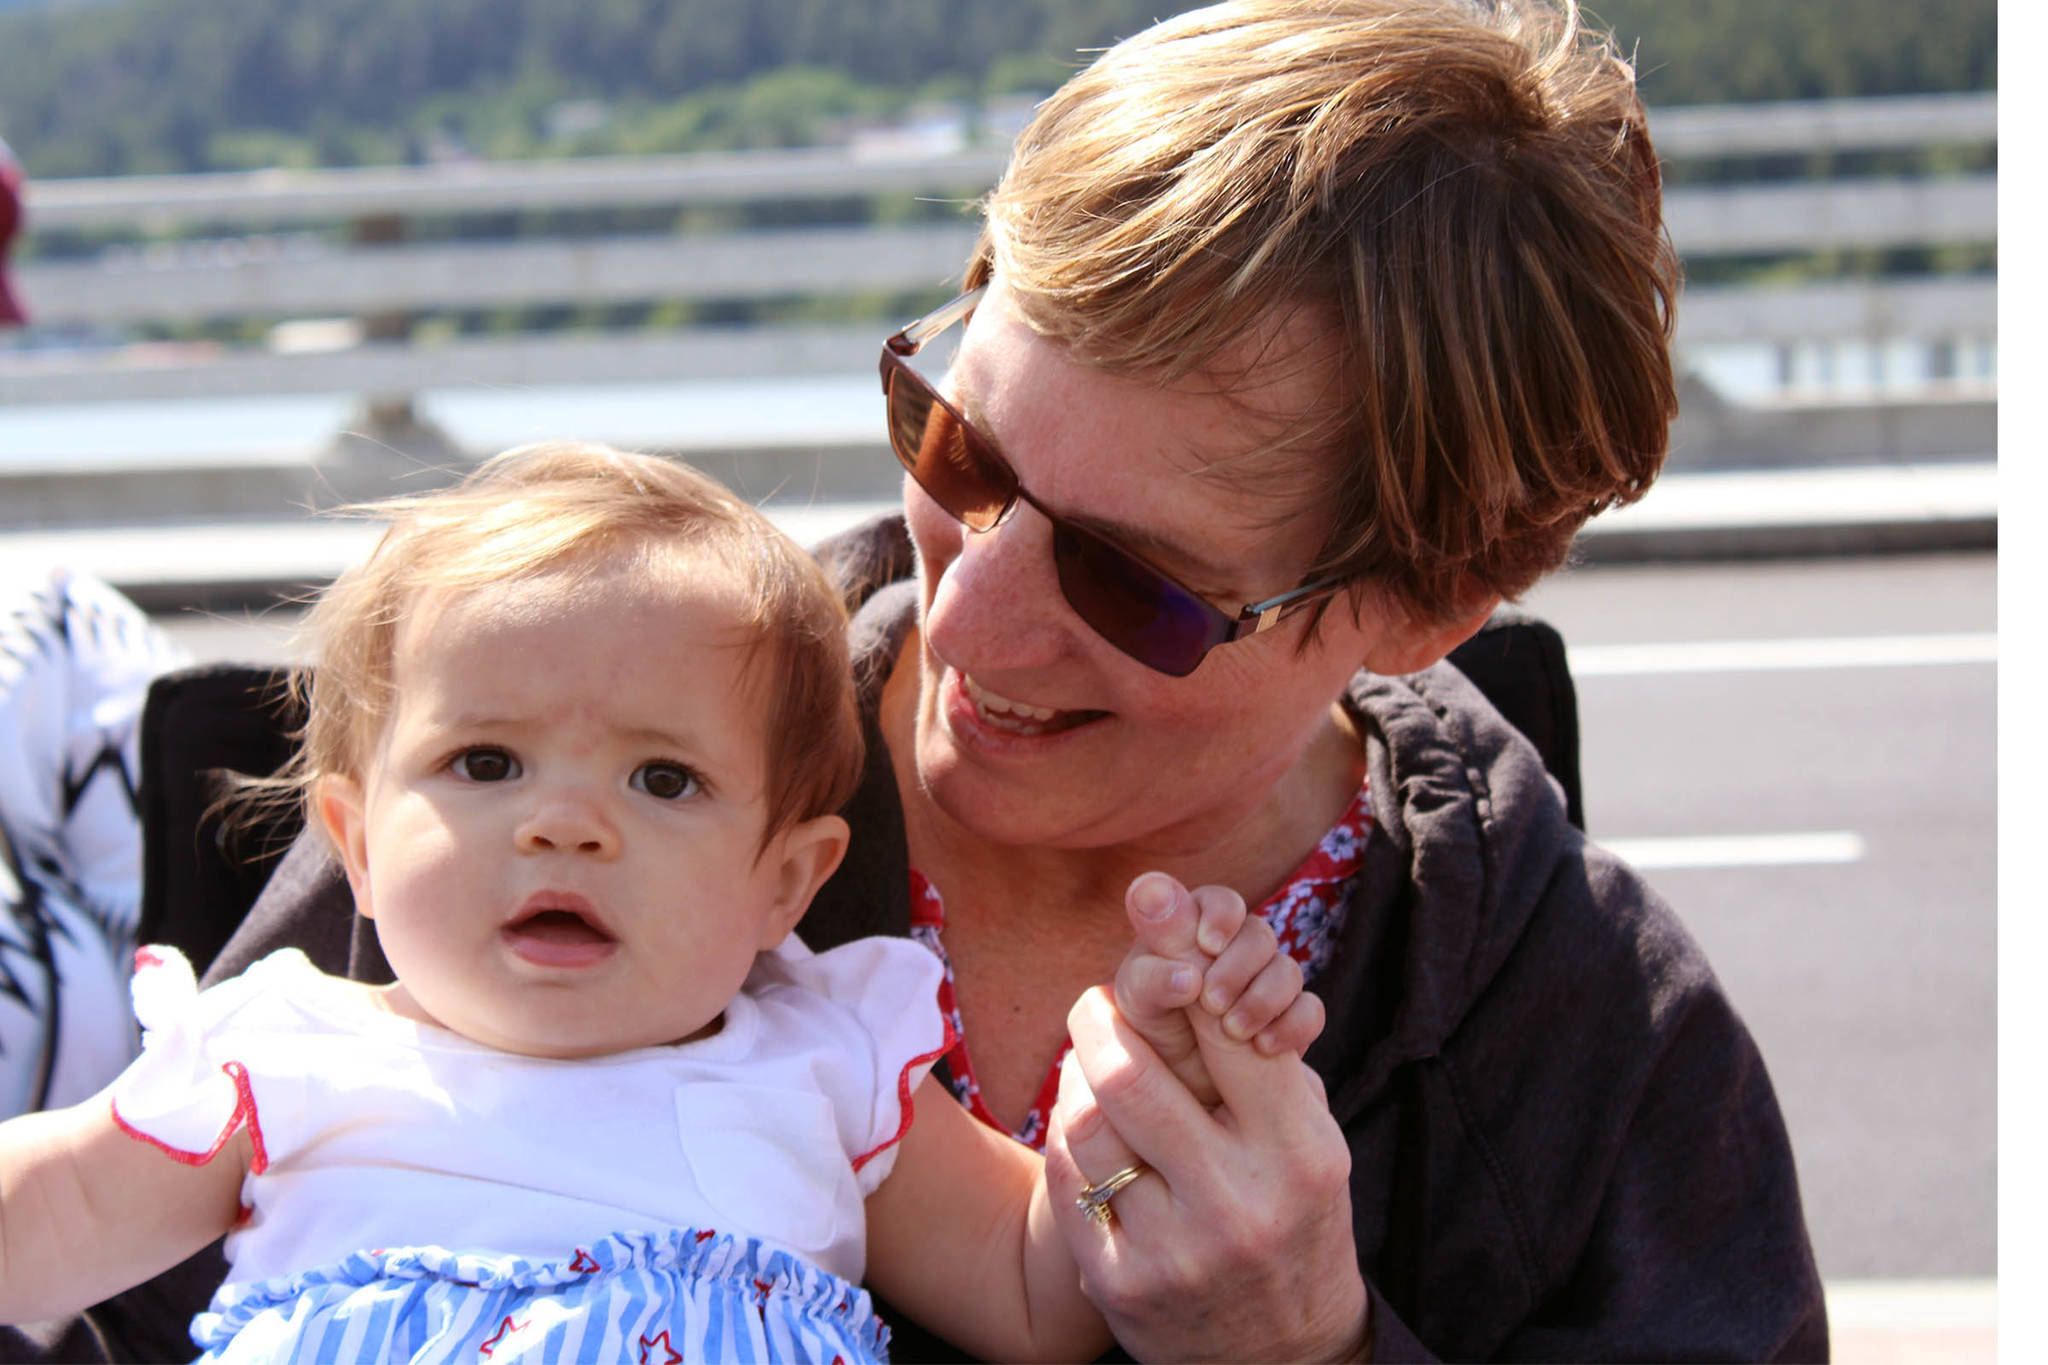 Millie Hiebenthal, 10 months, waits for the parade to start in downtown Juneau with her grandmother, Debbie Soto on Sunday. (Dana Zigmund/Juneau Empire)